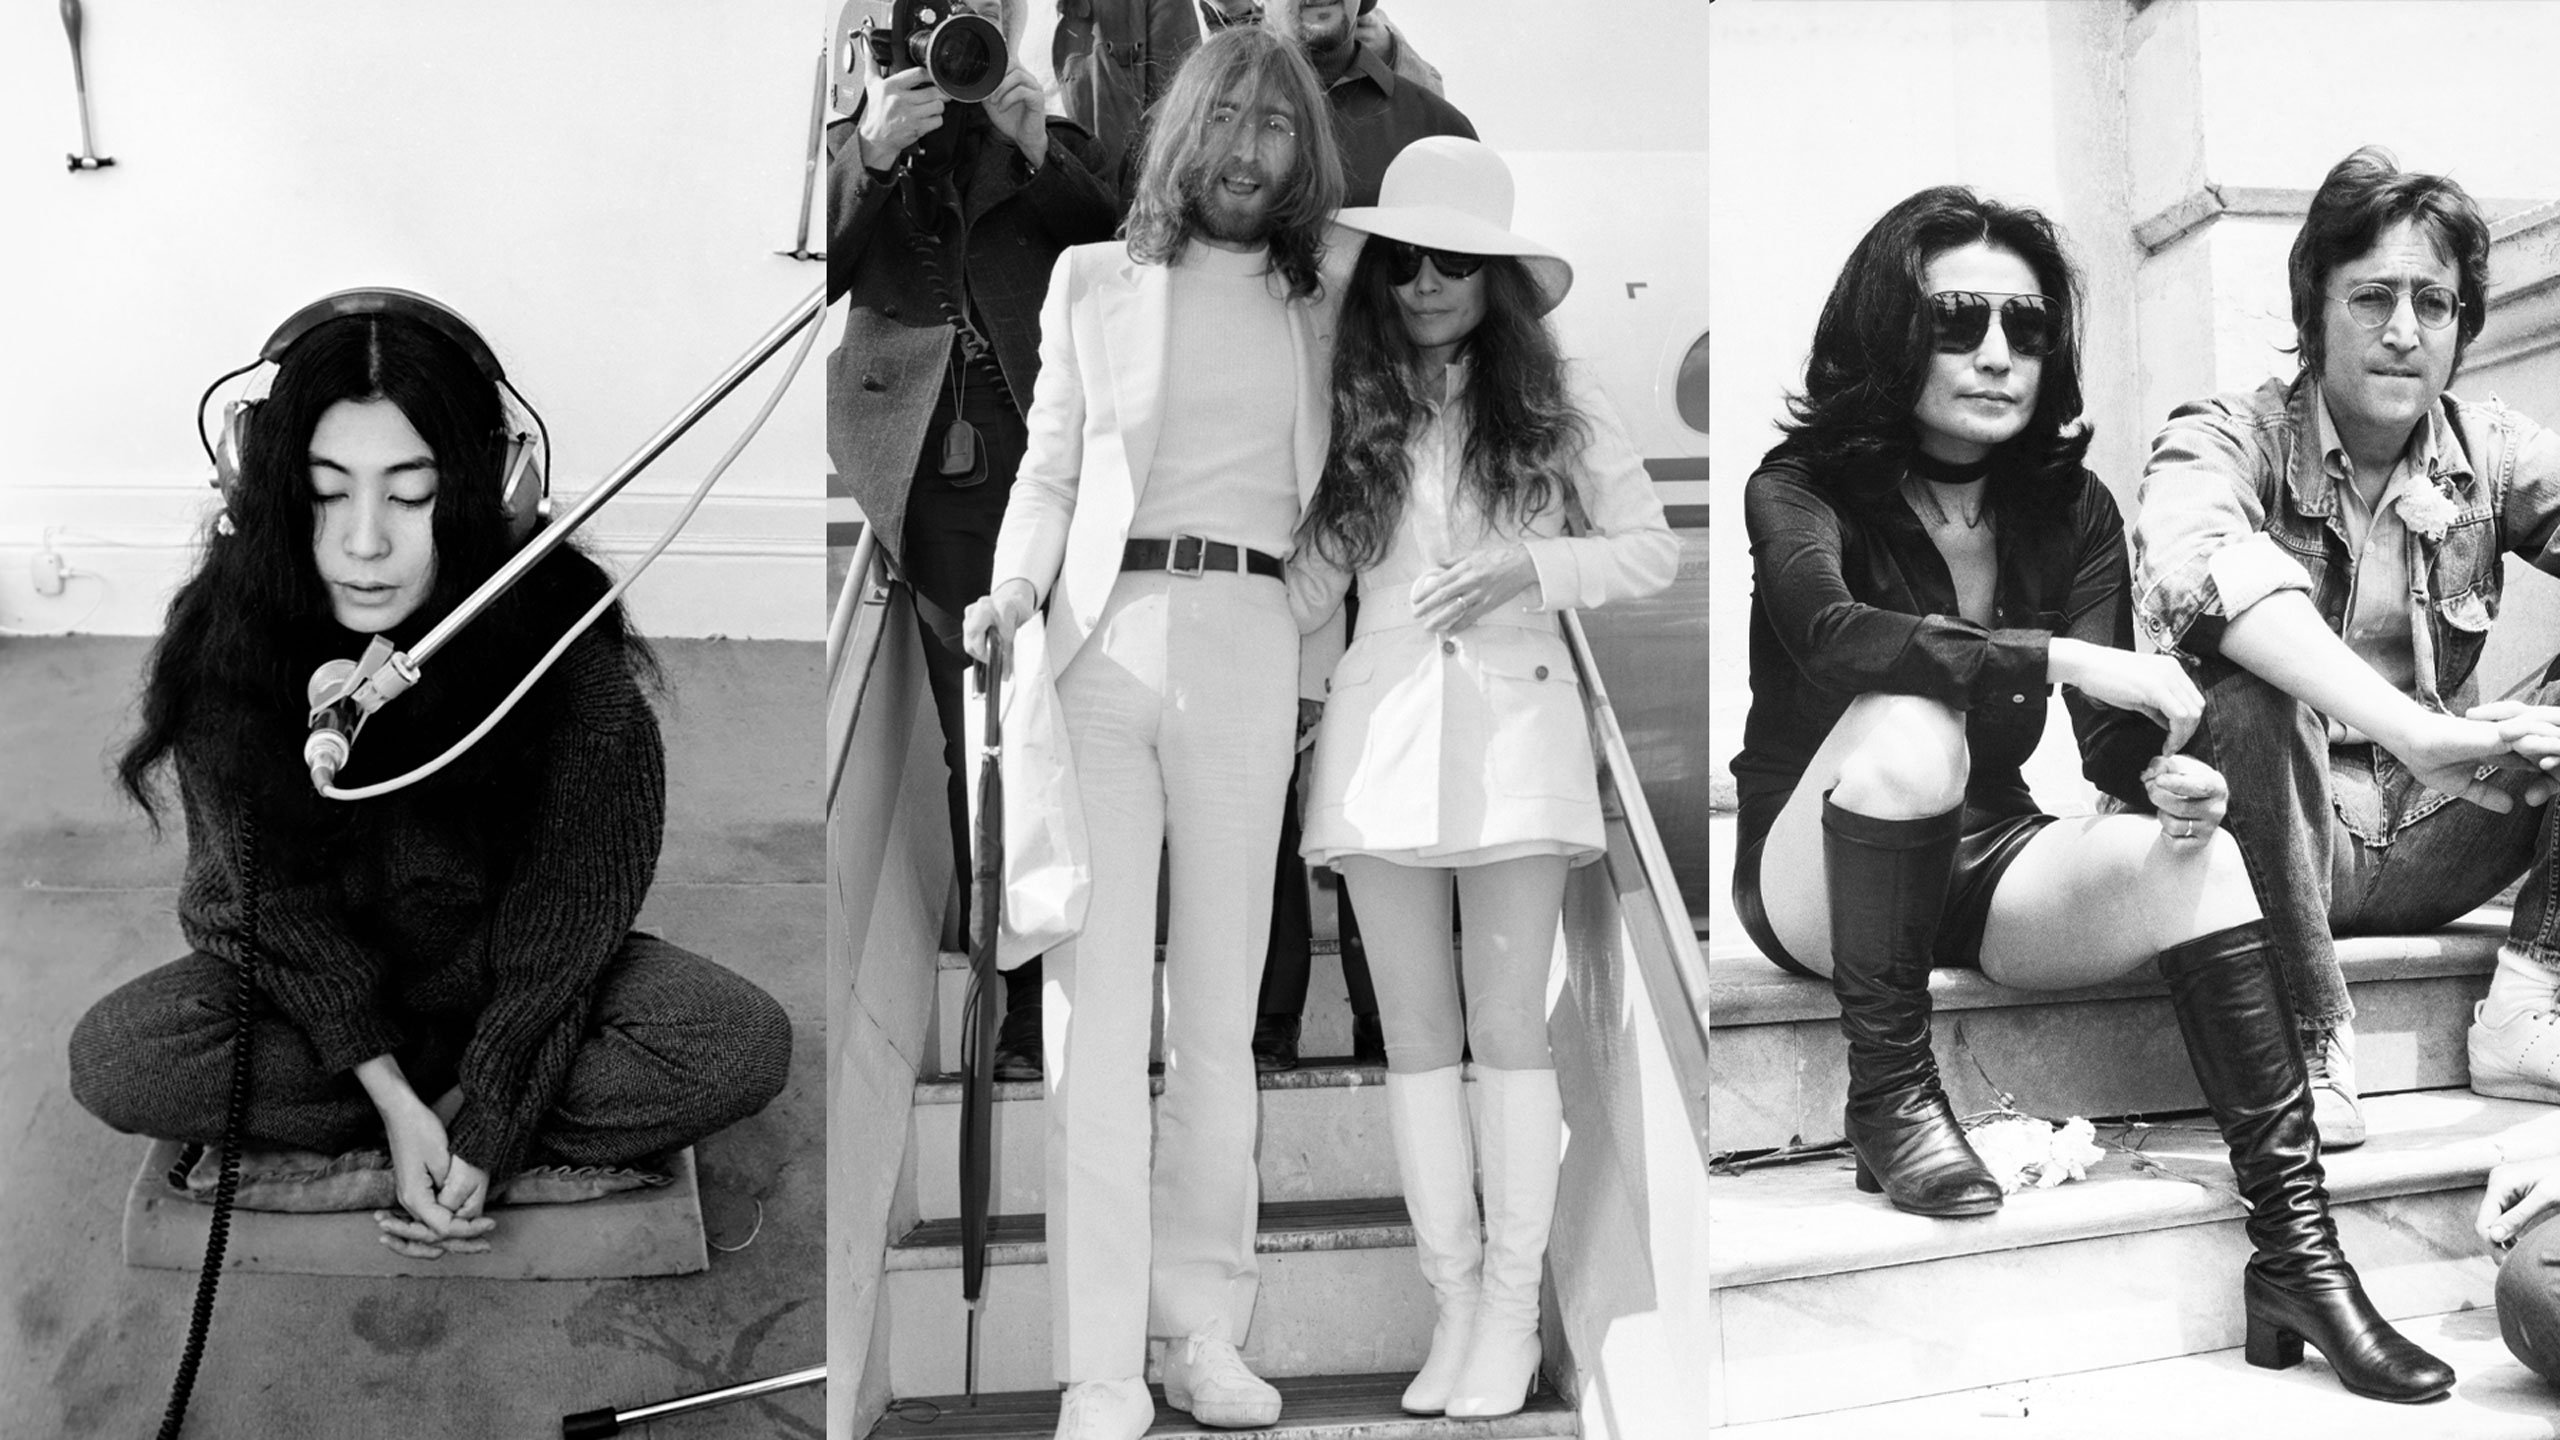 70s Fashion: Yoko Ono's 60s youth style and iconic art outfits